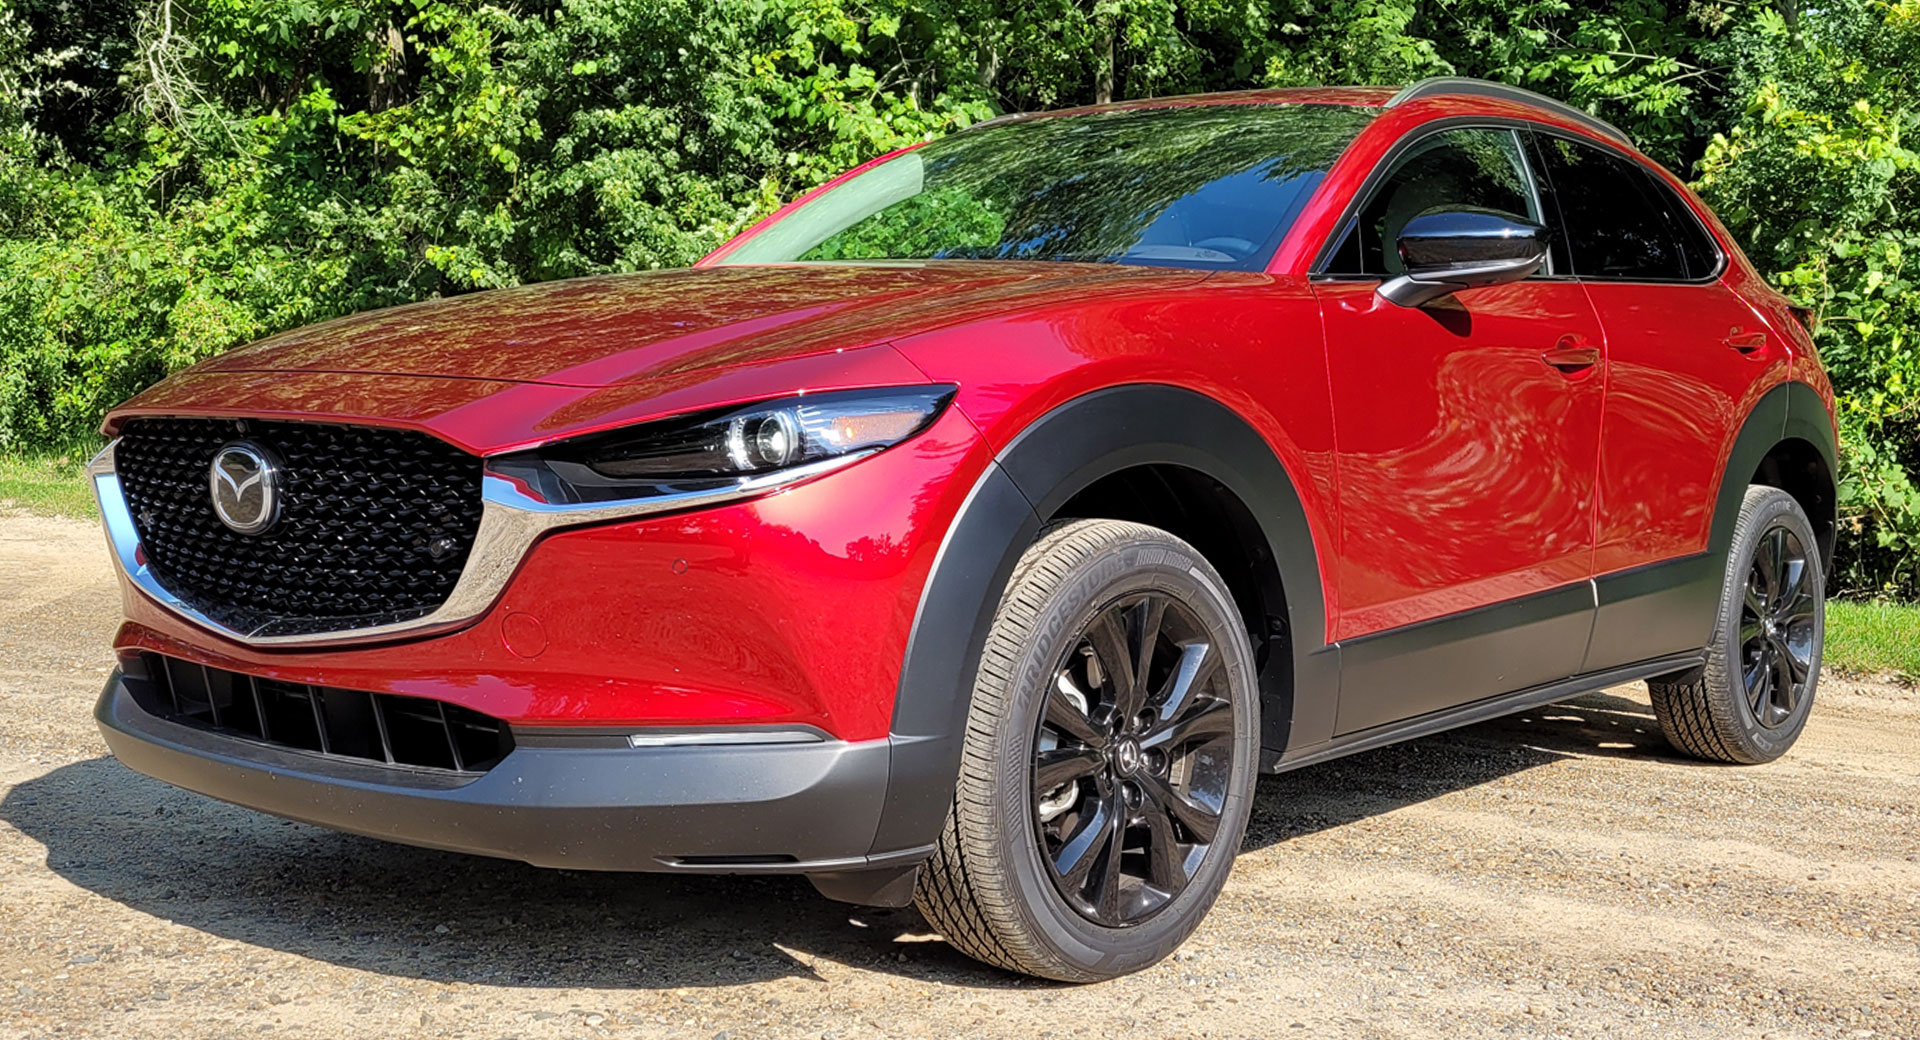 Pushed: The 2021 Mazda CX-30 Turbo Is A Luxurious Efficiency Crossover For The Plenty Auto Recent